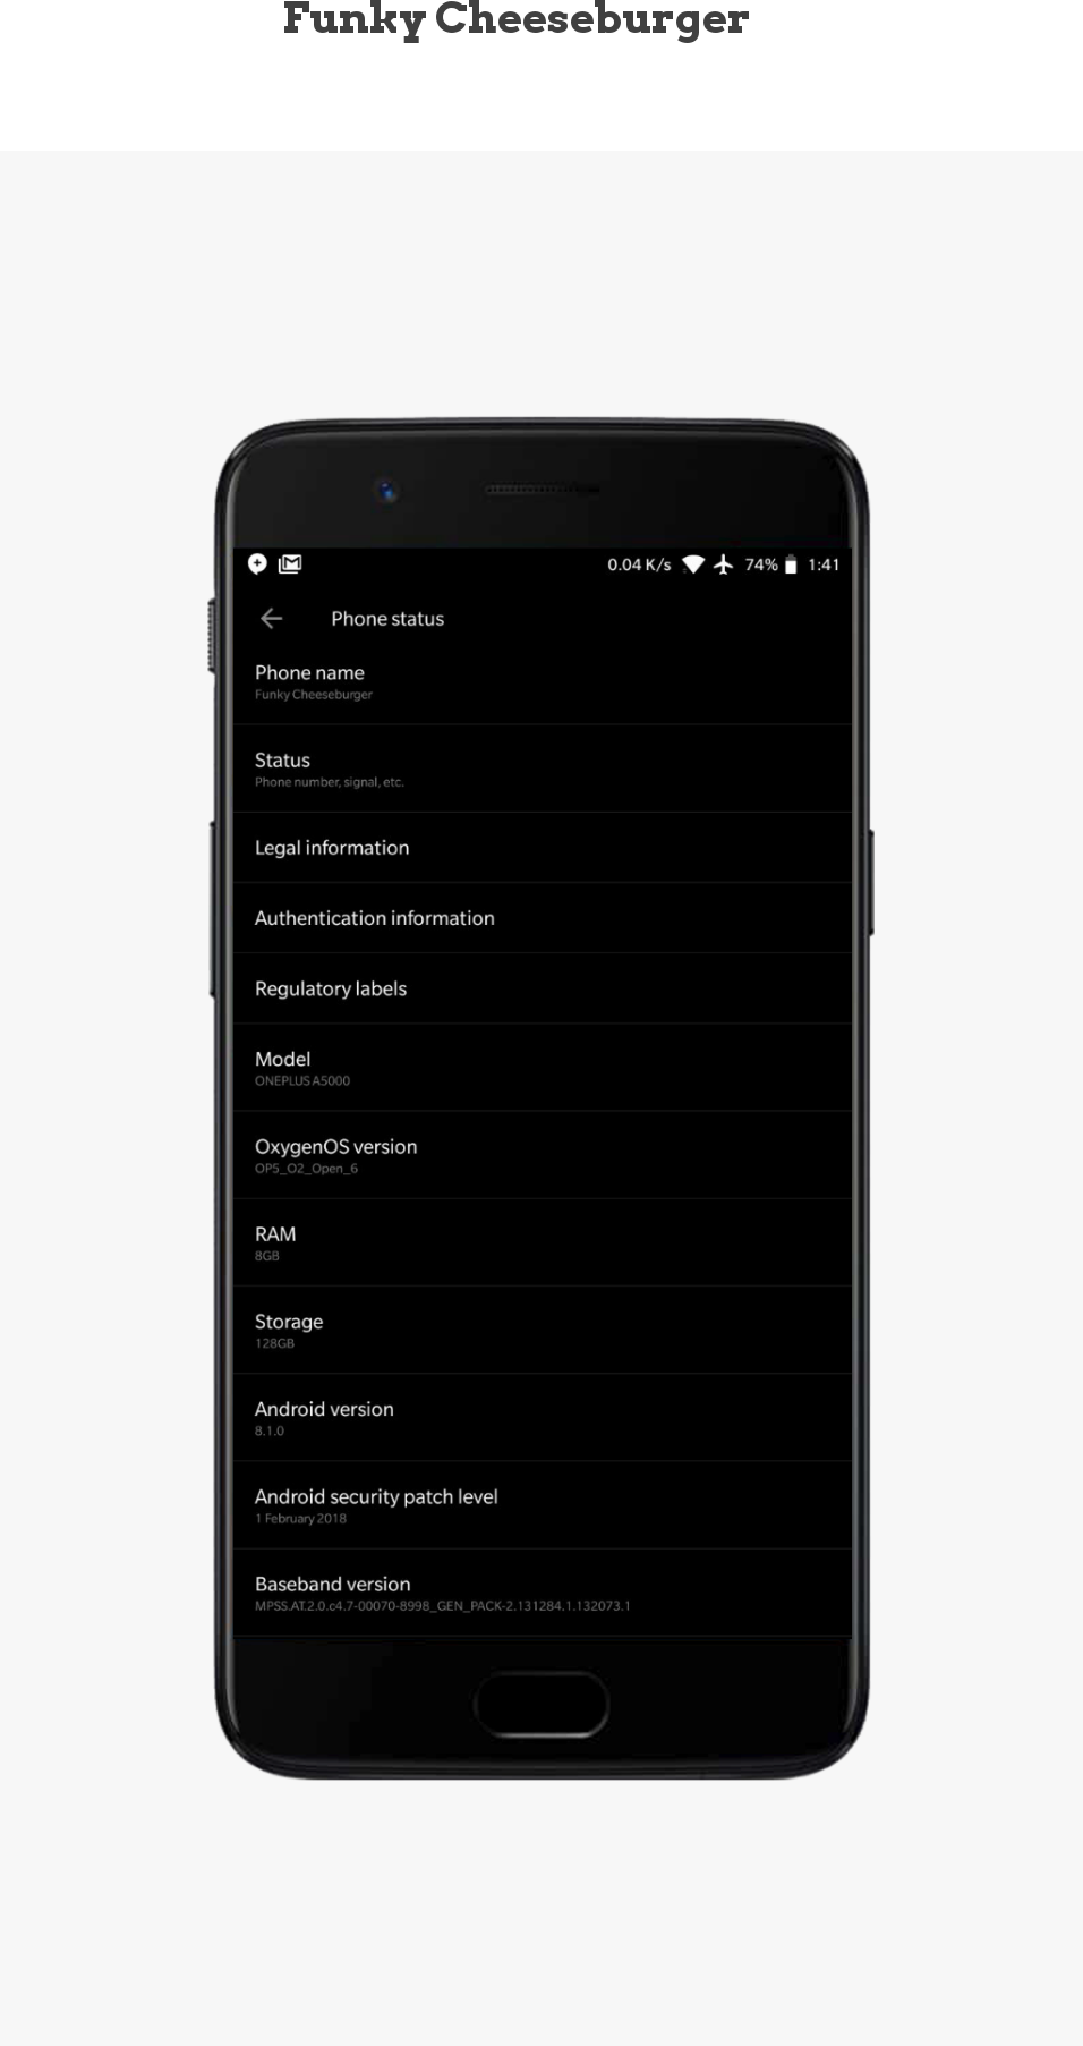 OnePlus 5 devices get Android 8.1 Oreo through Open Beta 6 update 2